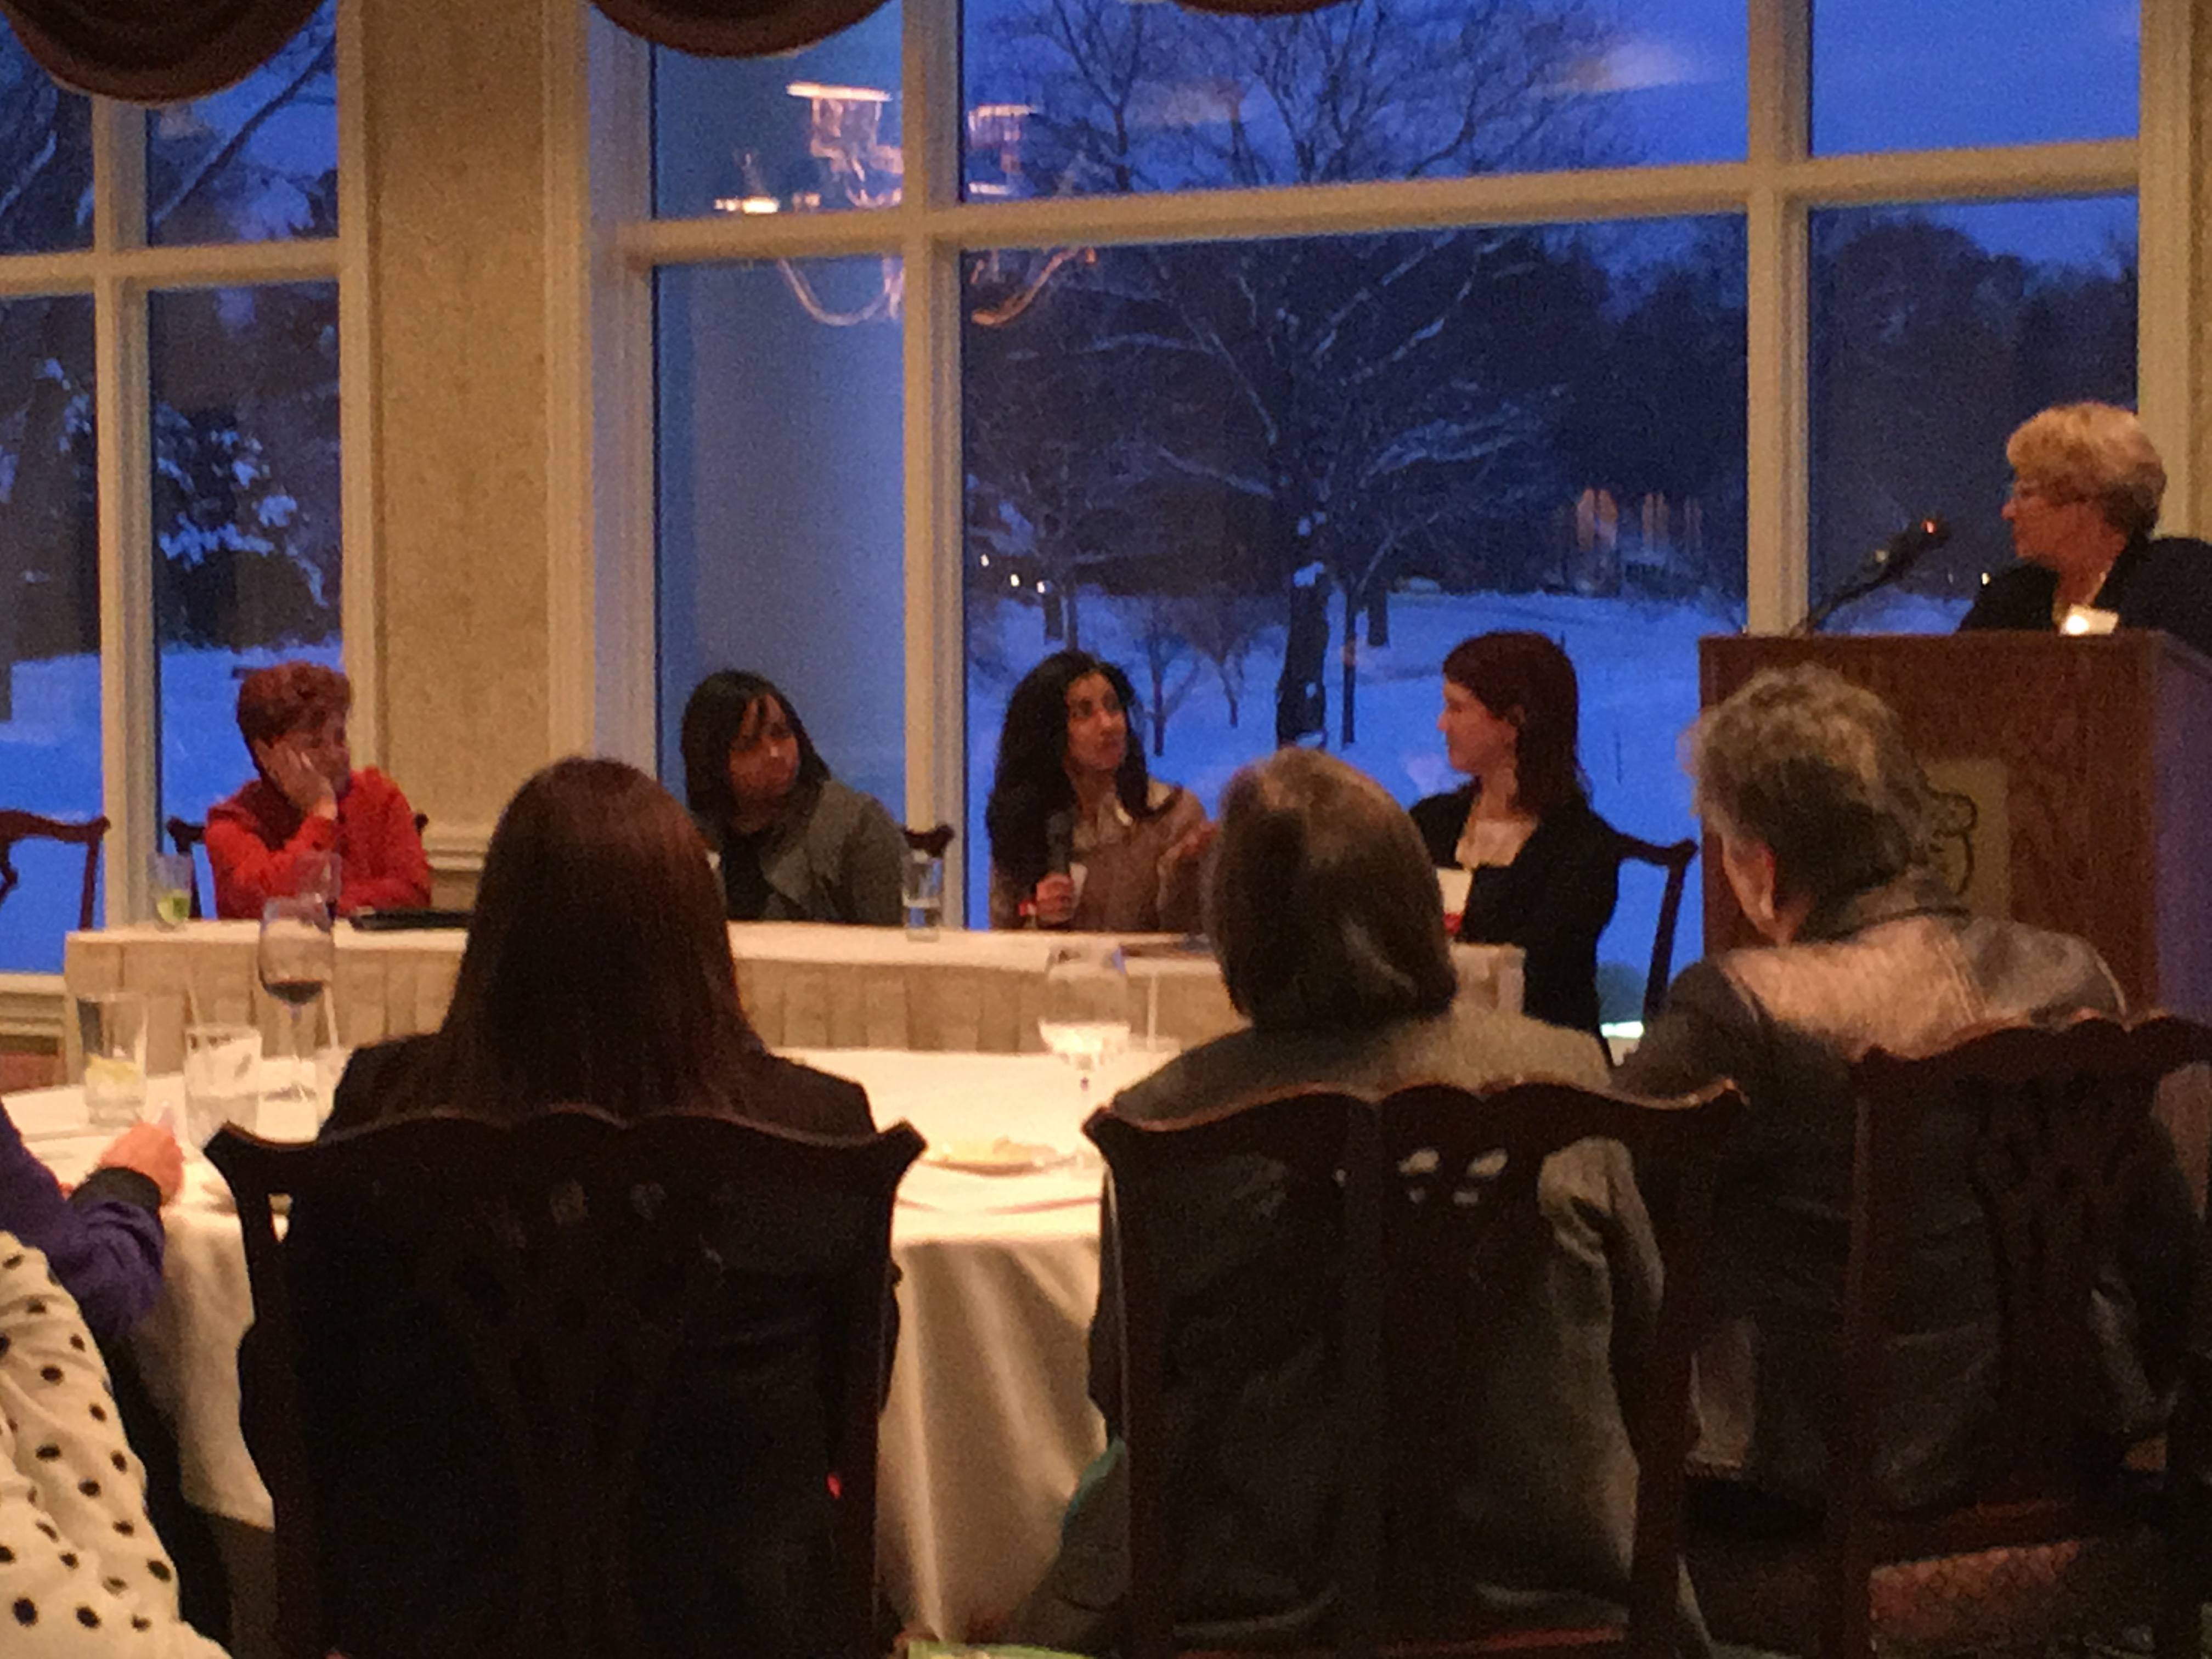 athena-akron-after-hours-panel-discussion-communityjpg